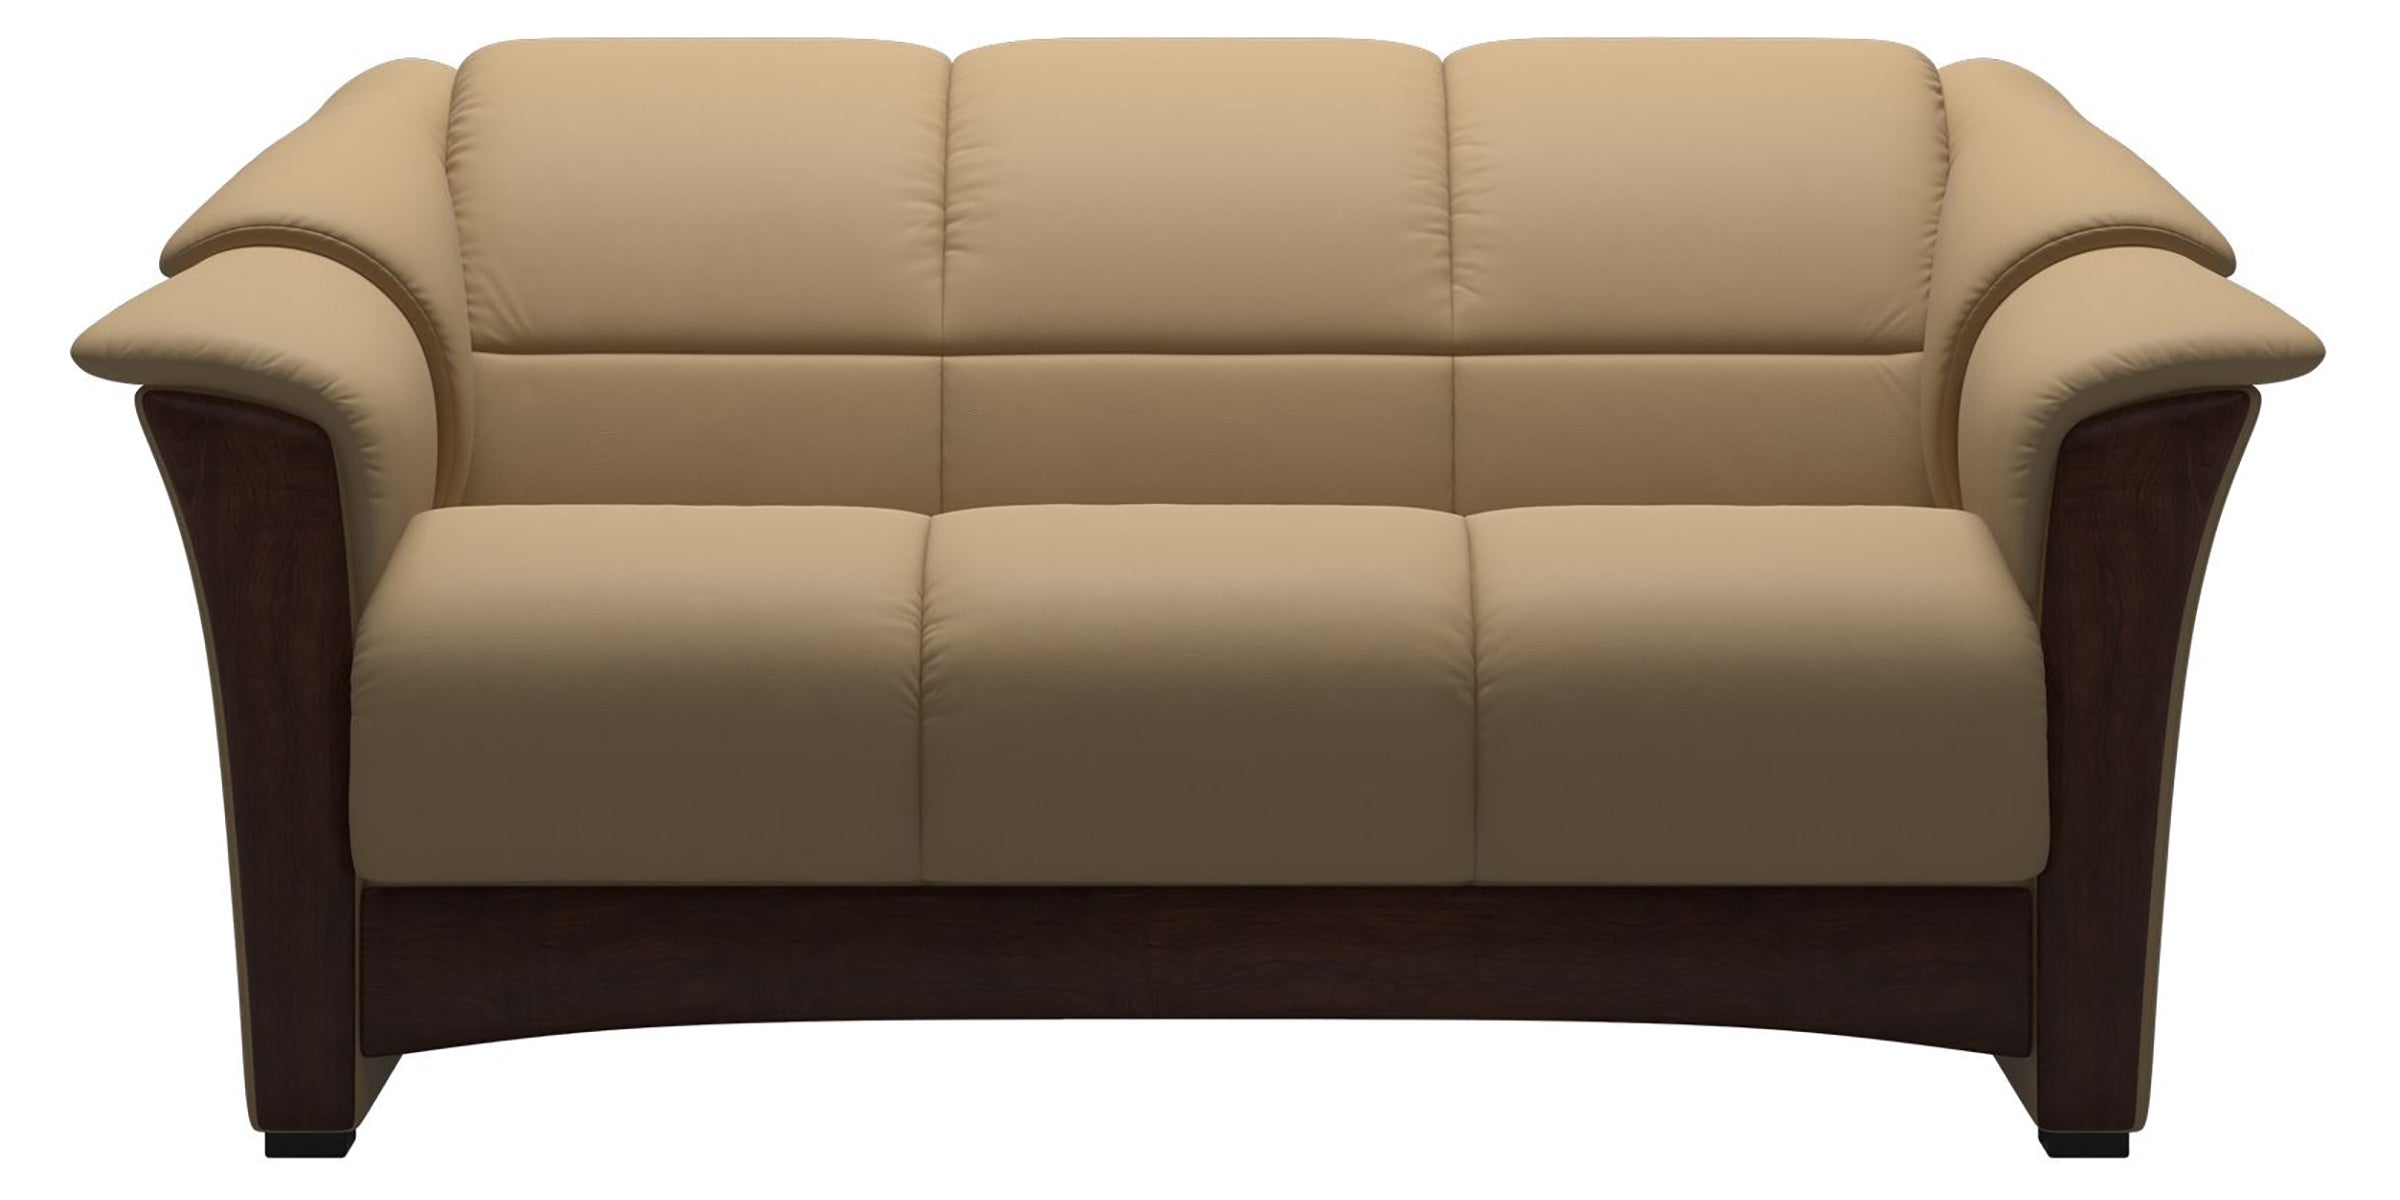 Paloma Leather Sand and Brown Base | Stressless Oslo Loveseat | Valley Ridge Furniture